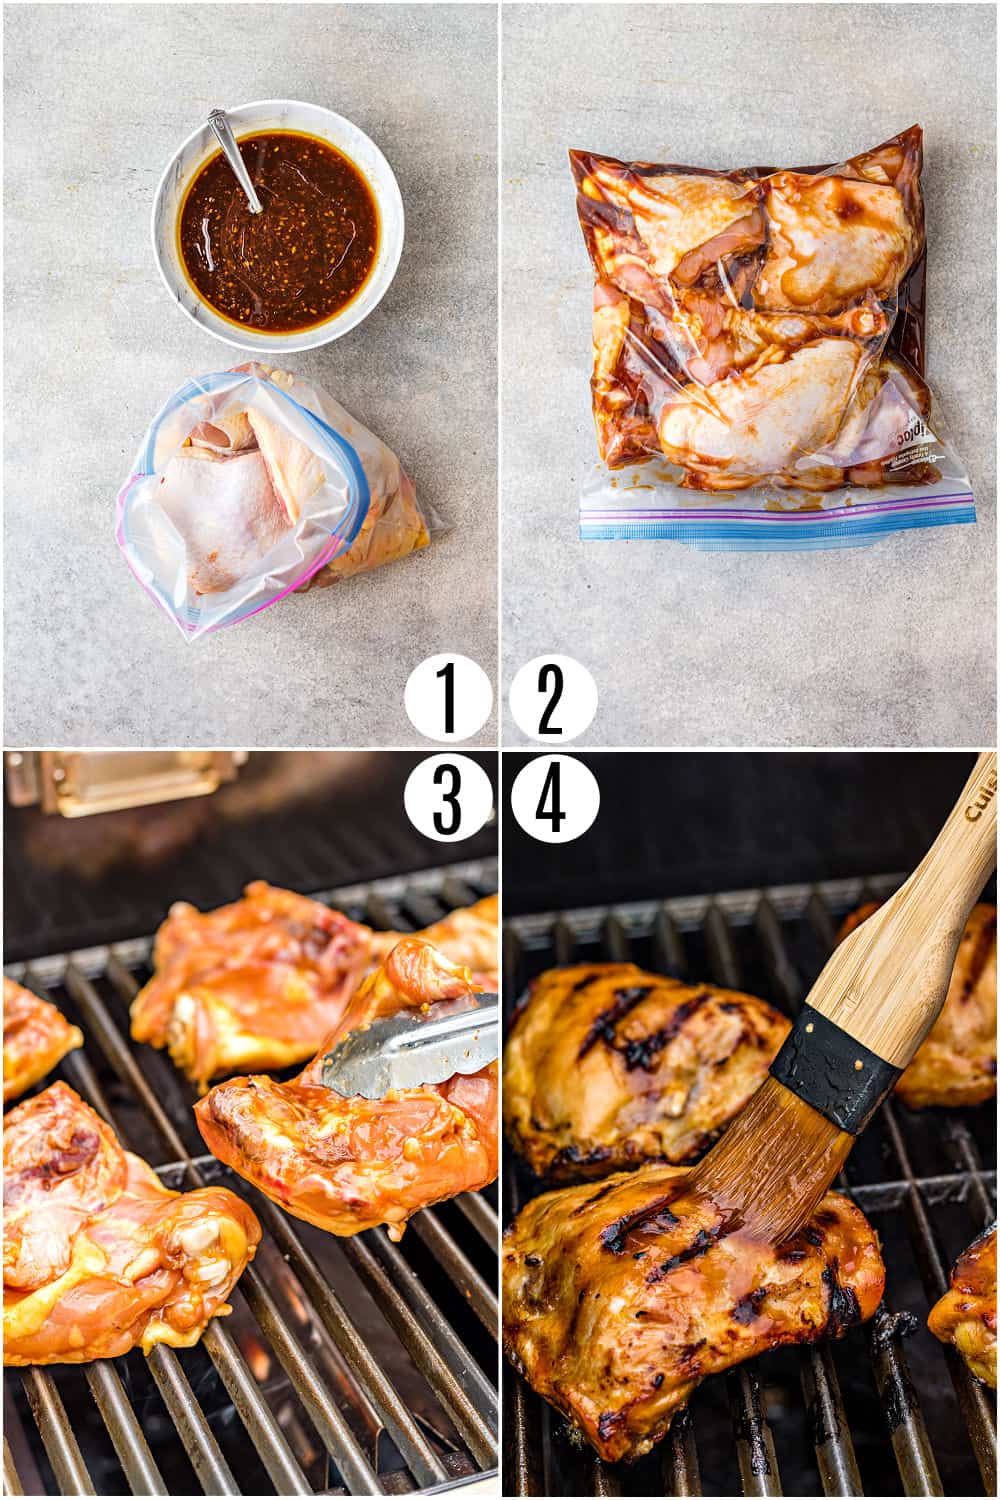 Step by step photos showing how to make huli huli chicken on the grill.